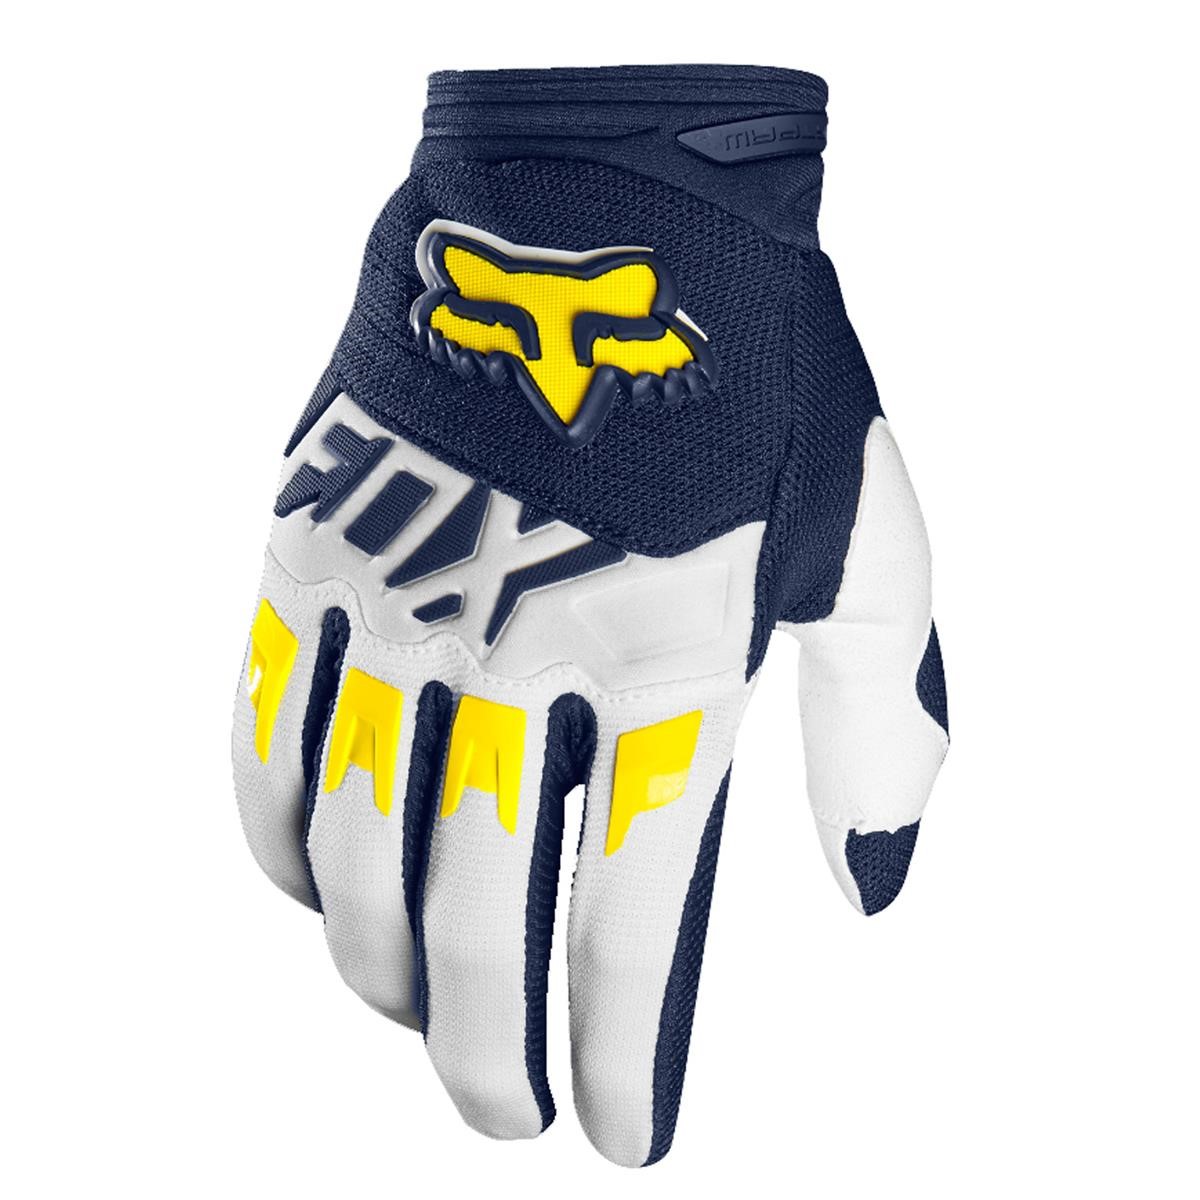 Fox Kids Gloves Dirtpaw Race White/Yellow - Special Edition